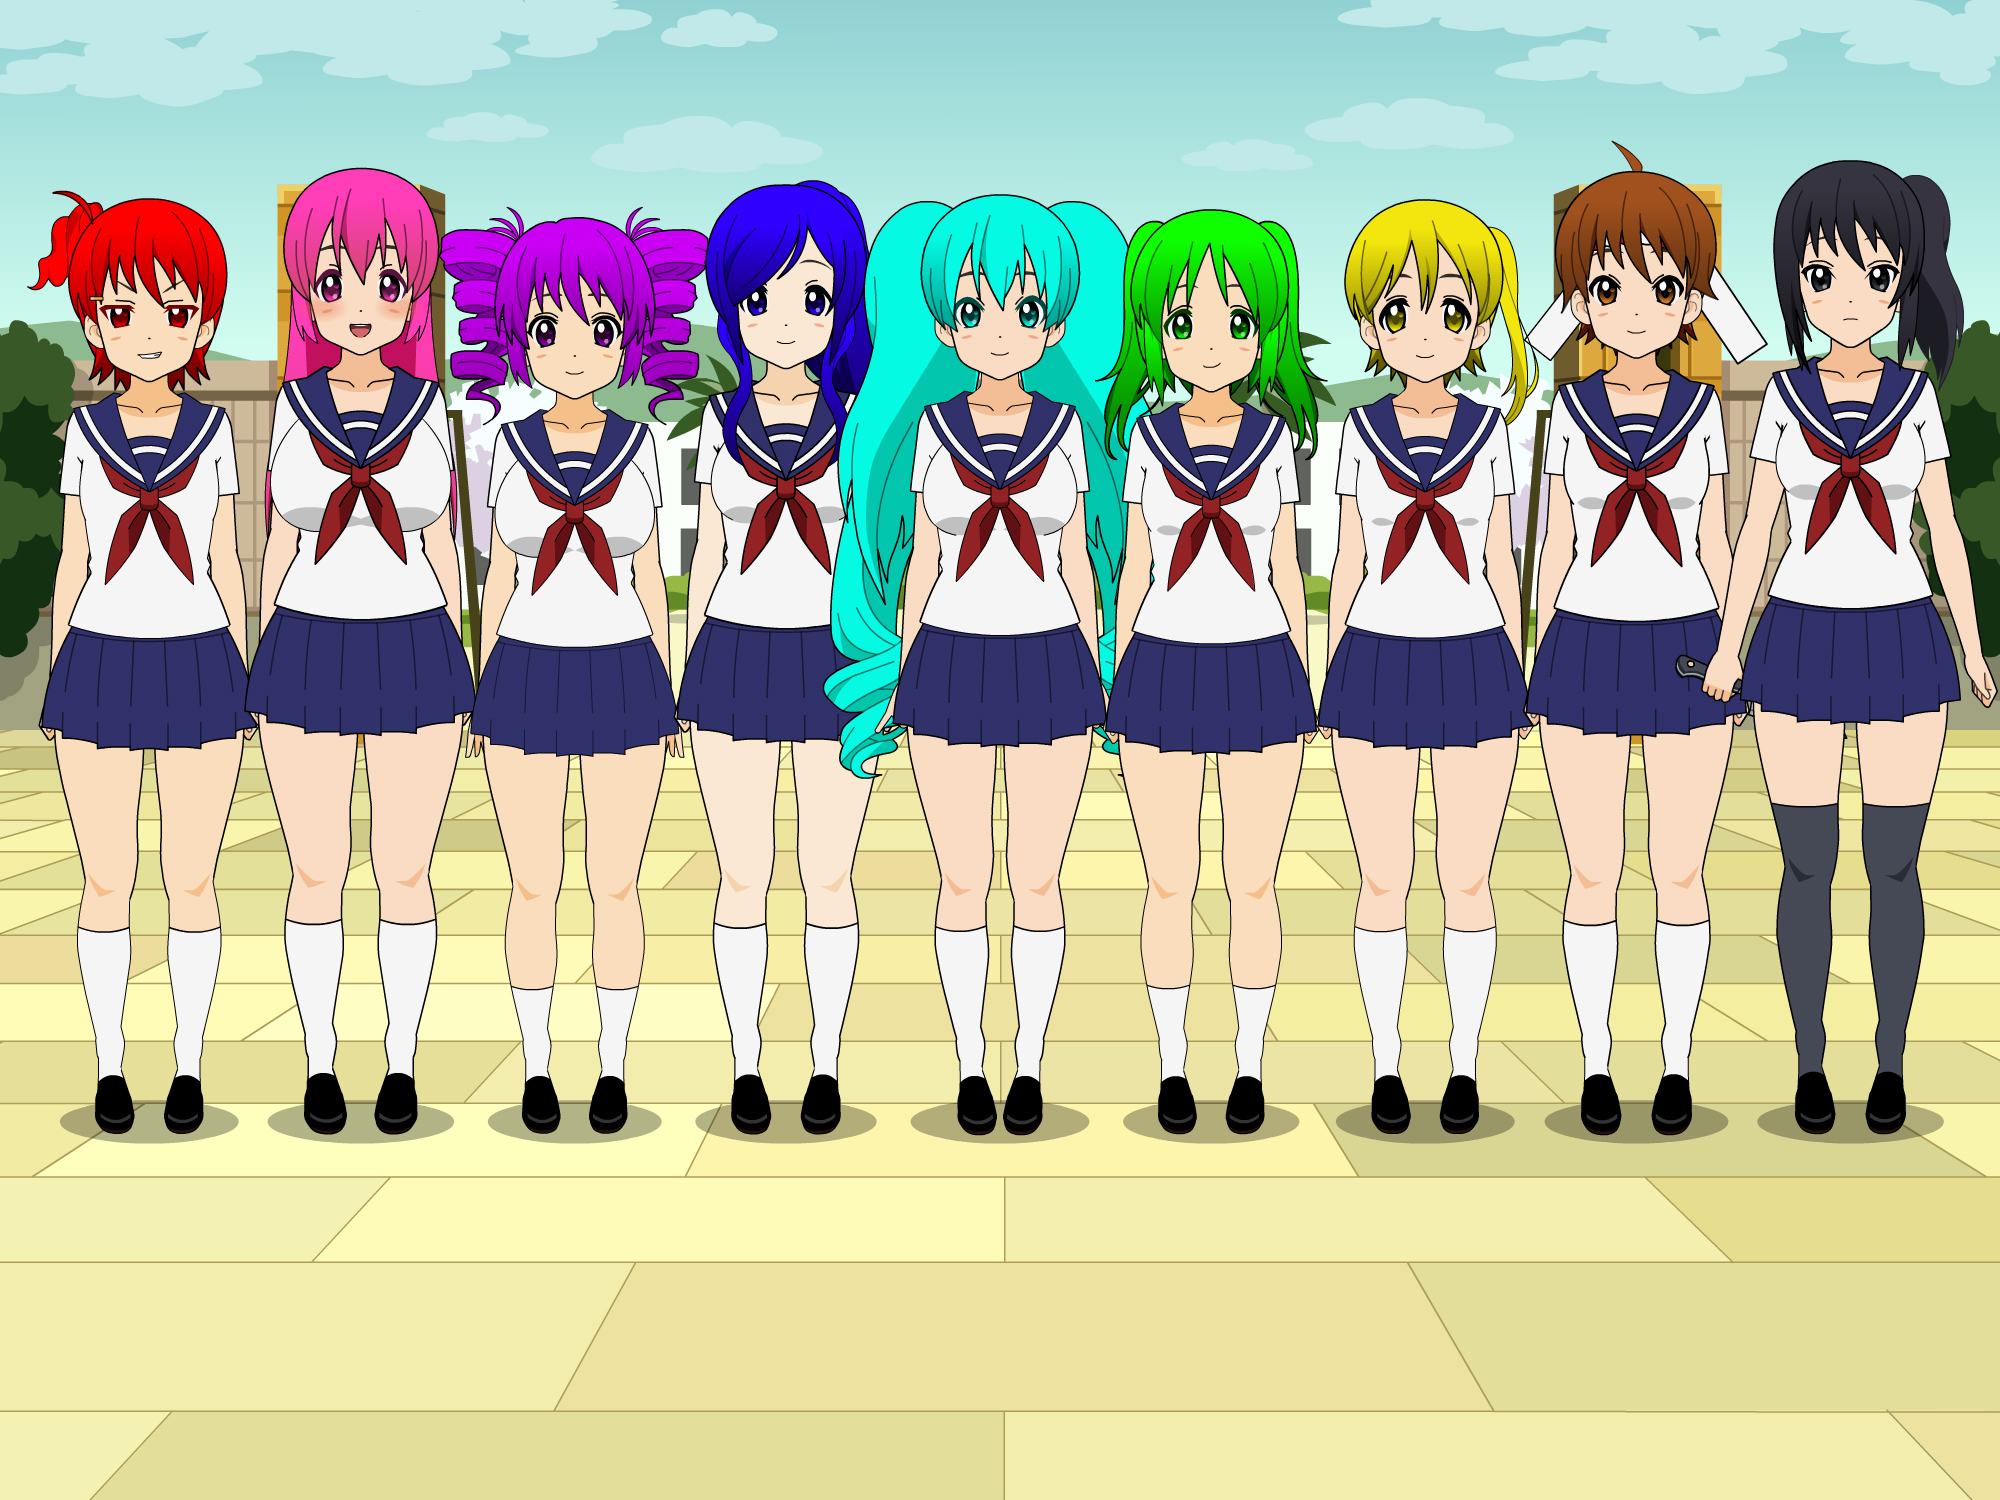 yandere simulator 1980s mode all characters